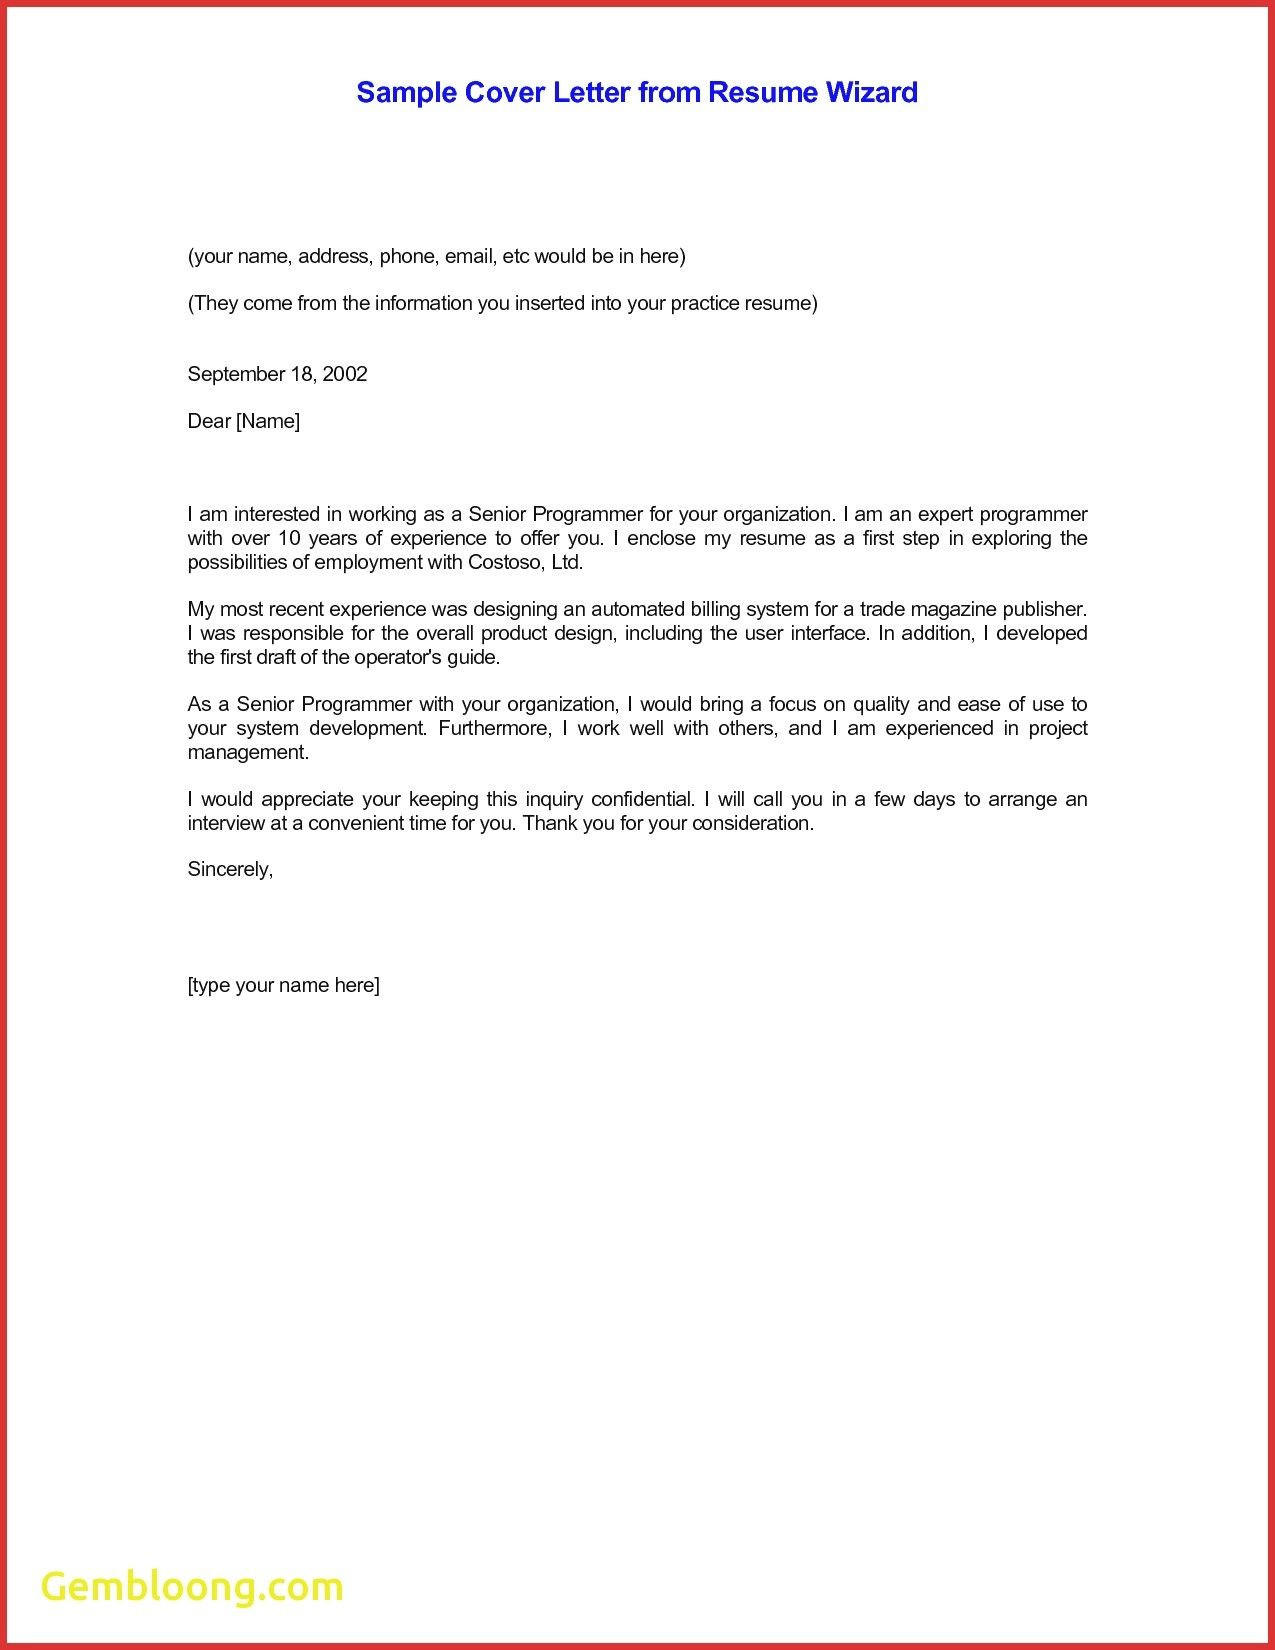 Sample Letter to Send Resume by Email Email Cv Cover Letter Template – Resume format Cover Letter for …